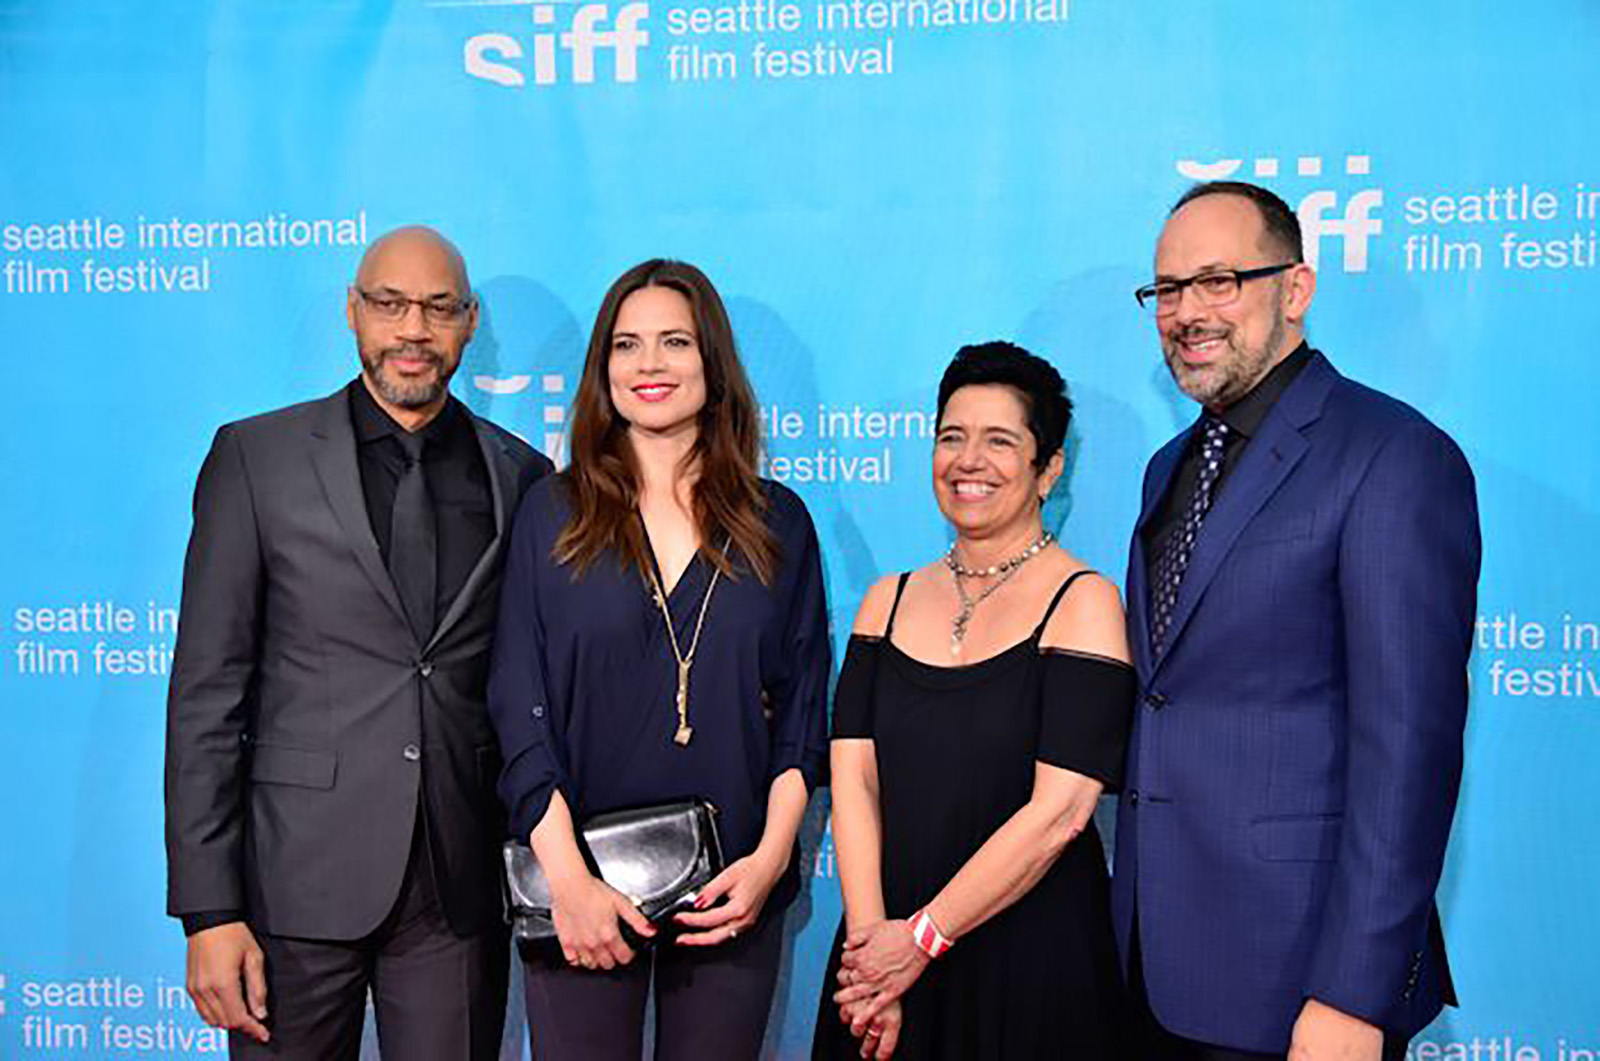 Musician and actor, André 3000, and actress, Hayley Atwell, celebrate their film, Jimi: All Is by My Side, with SIFF's Mary Bacarella and Carl Spence on the red carpet on Opening Night